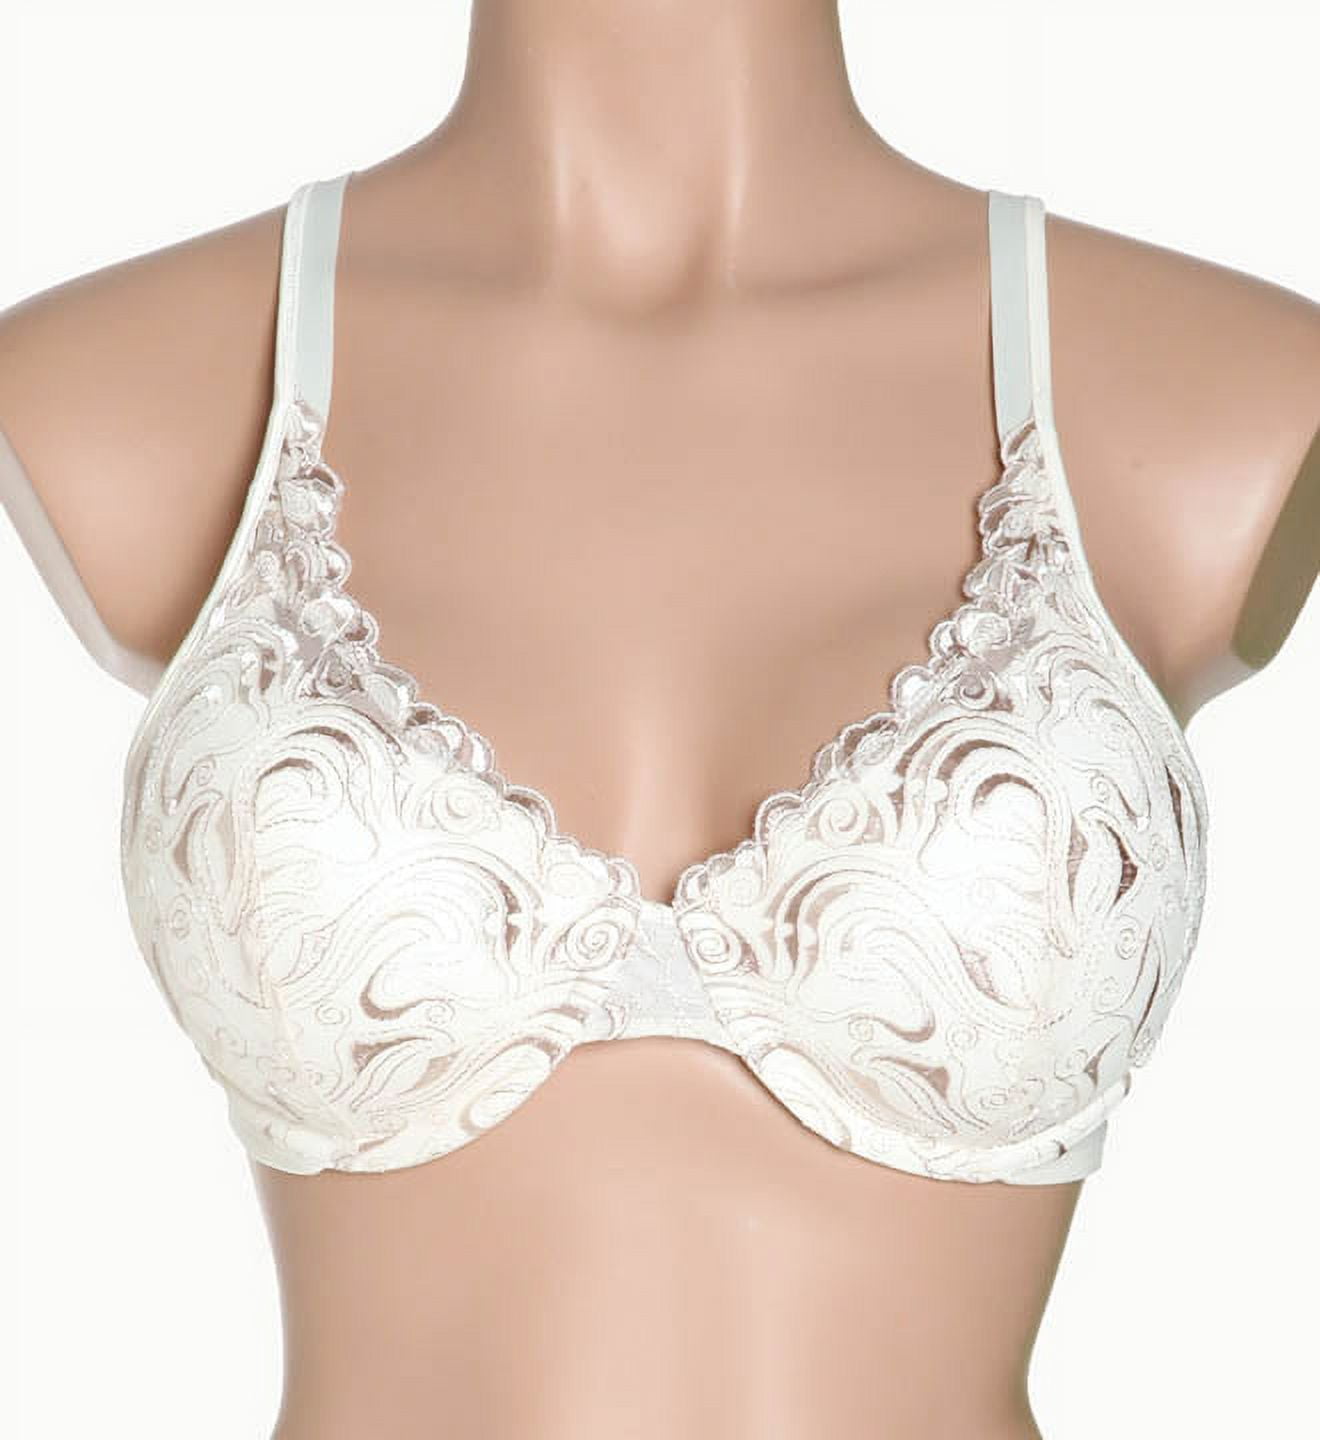 Playtex Love My Curves Side-Smoothing Embroidered Underwire Bra